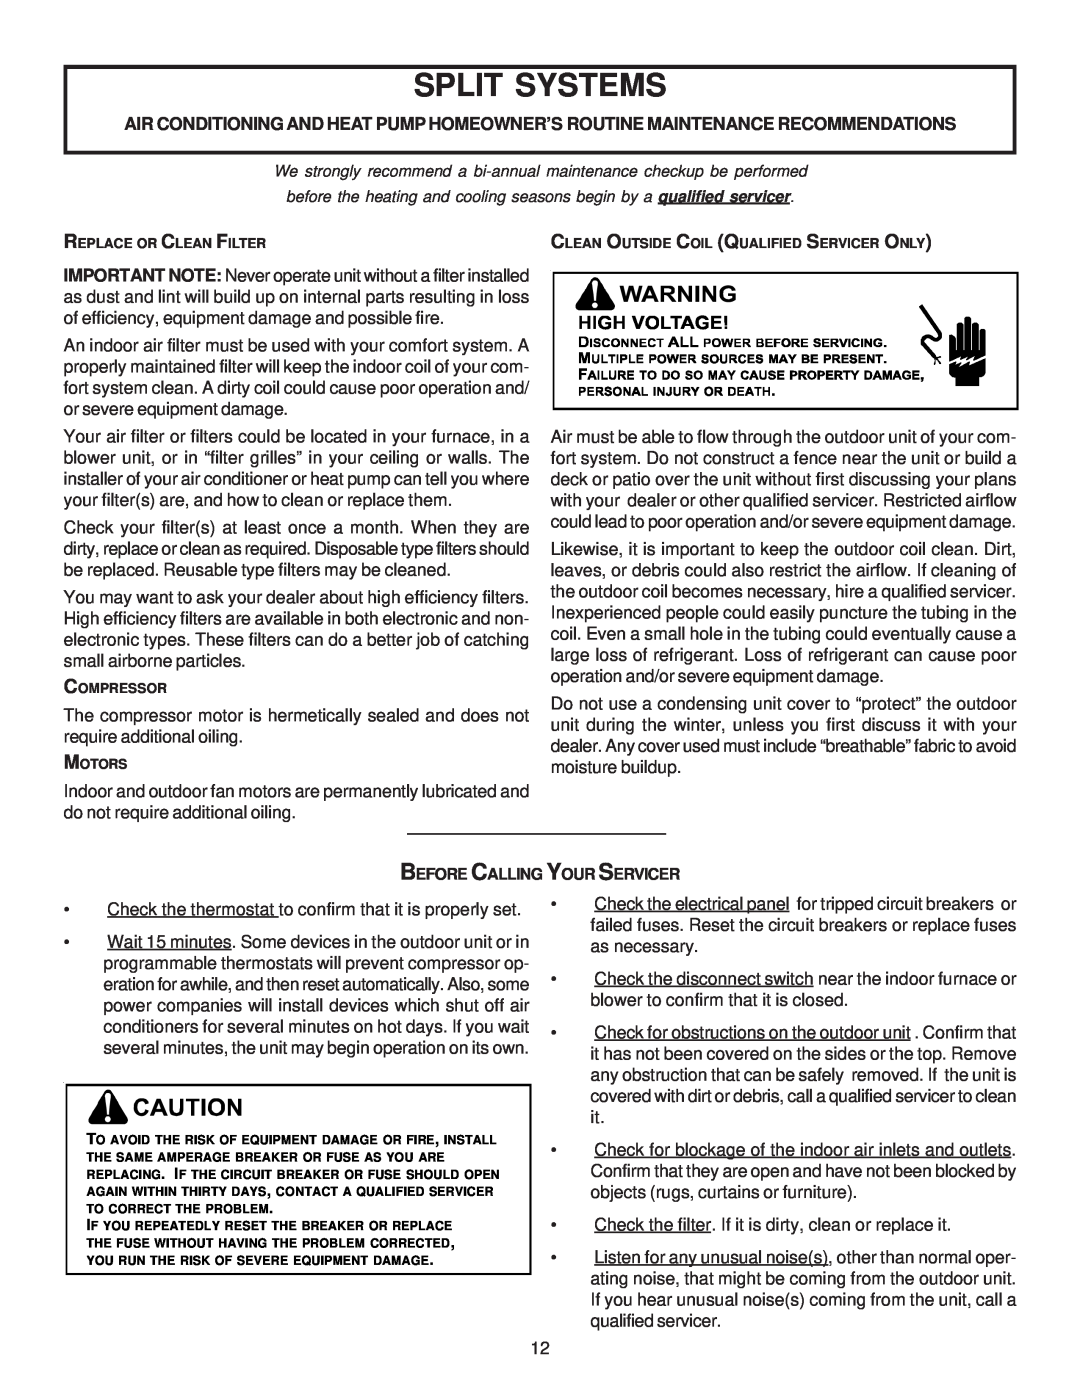 Goodman Mfg IO-402G, CONDENSING AC UNIT SINGLE / THREE PHASE AIR CONDITIONERS important safety instructions Split Systems 